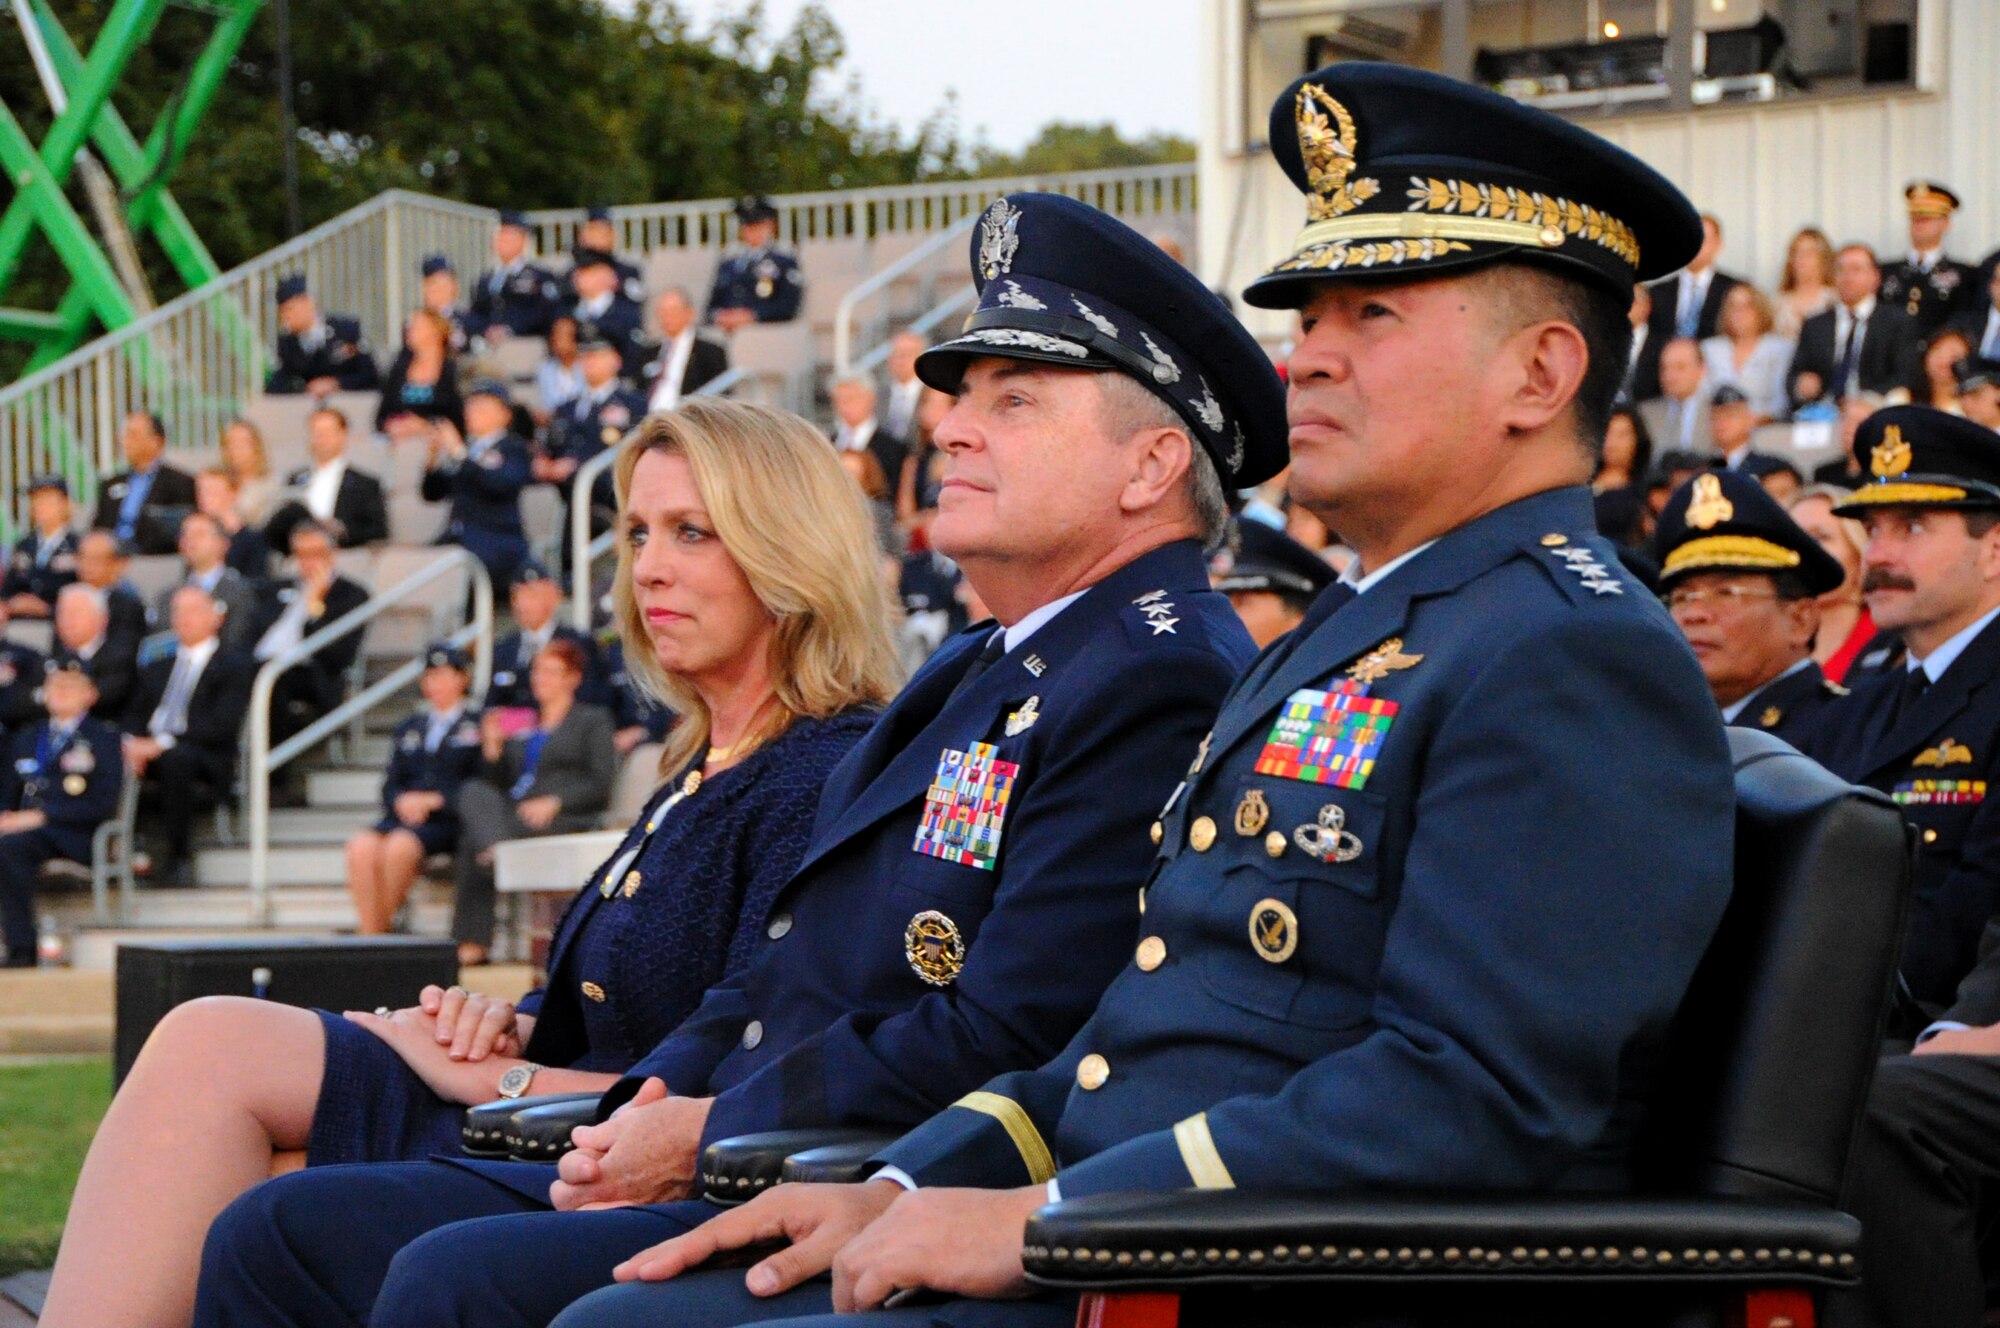 Secretary of the Air Force Deborah Lee James, Air Force Chief of Staff, Gen. Mark A. Welsh III, and Lt. Gen. Jeffrey Delgado, Philippine Air Force Commanding General, observe the United States Air Force Tattoo Sept. 17, 2015. The Air Force District of Washington commemorated the United States Air Force's 68th birthday with a celebration of music, drill and ceremony, aircraft, and fireworks on the Air Force Ceremonial Lawn at Joint Base Anacostia-Bolling. The event featured flyovers of several aircraft including the Air Force Thunderbirds and a Warbird vintage aircraft squadron, as well as performances by the Air Force Band and Honor Guard. (U.S. Air Force photo/Staff Sgt. Matt Davis)